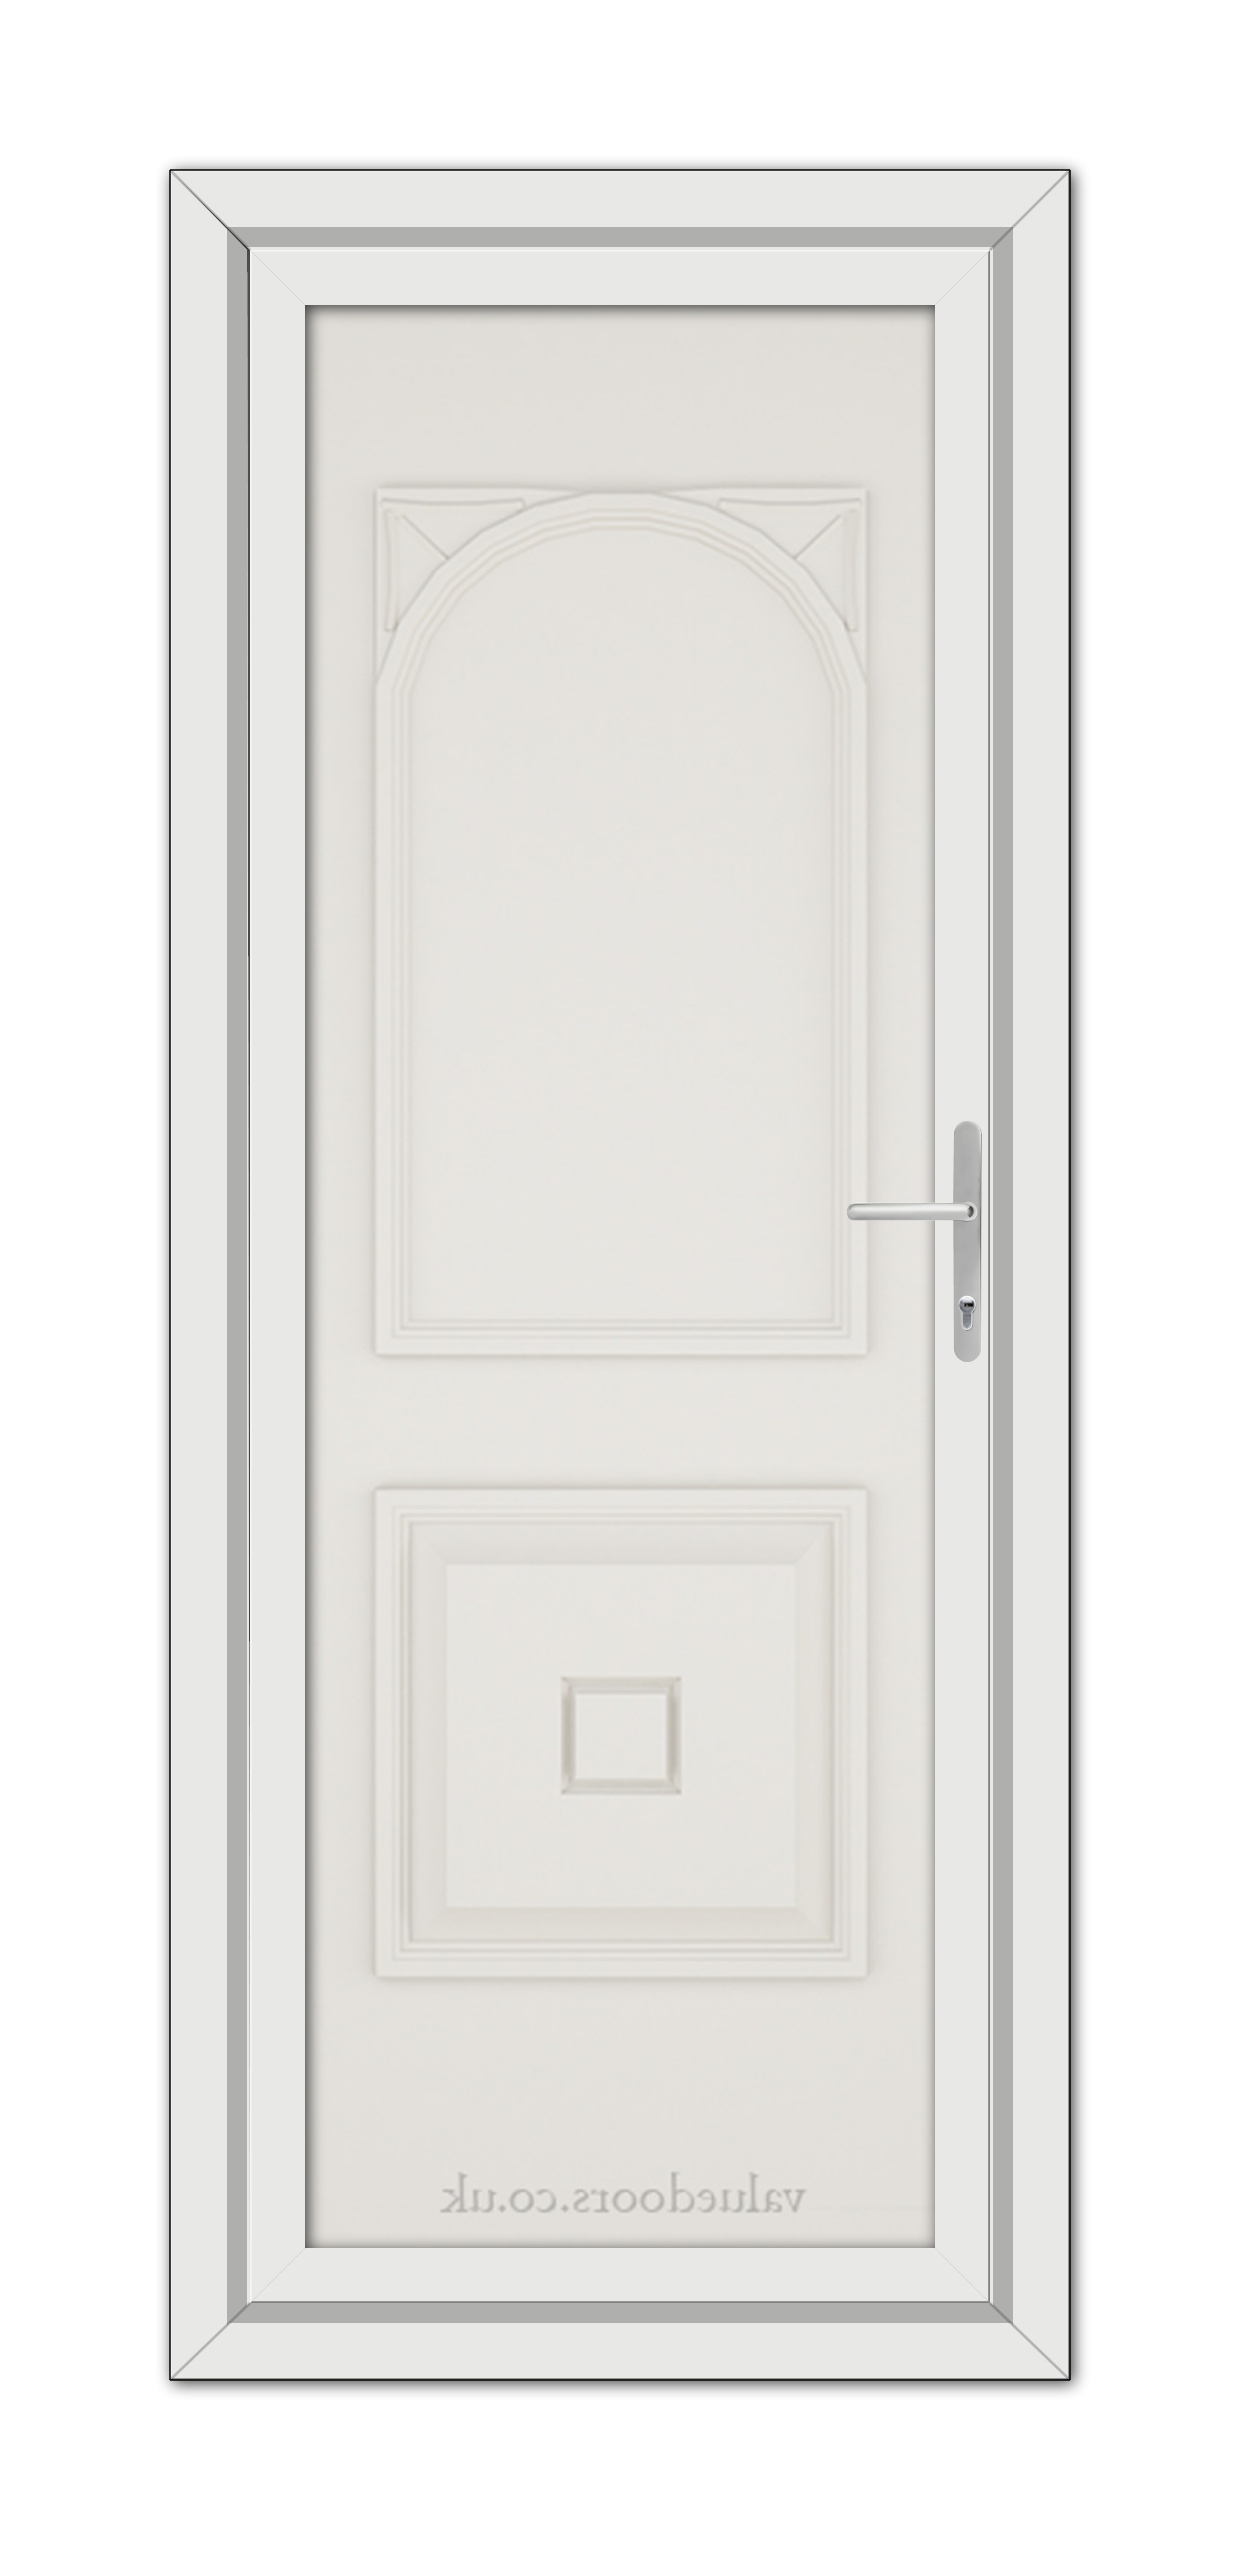 A White Cream Reims Solid uPVC Door with an arched top panel, a square bottom panel, and a metallic handle, set within a simple frame.